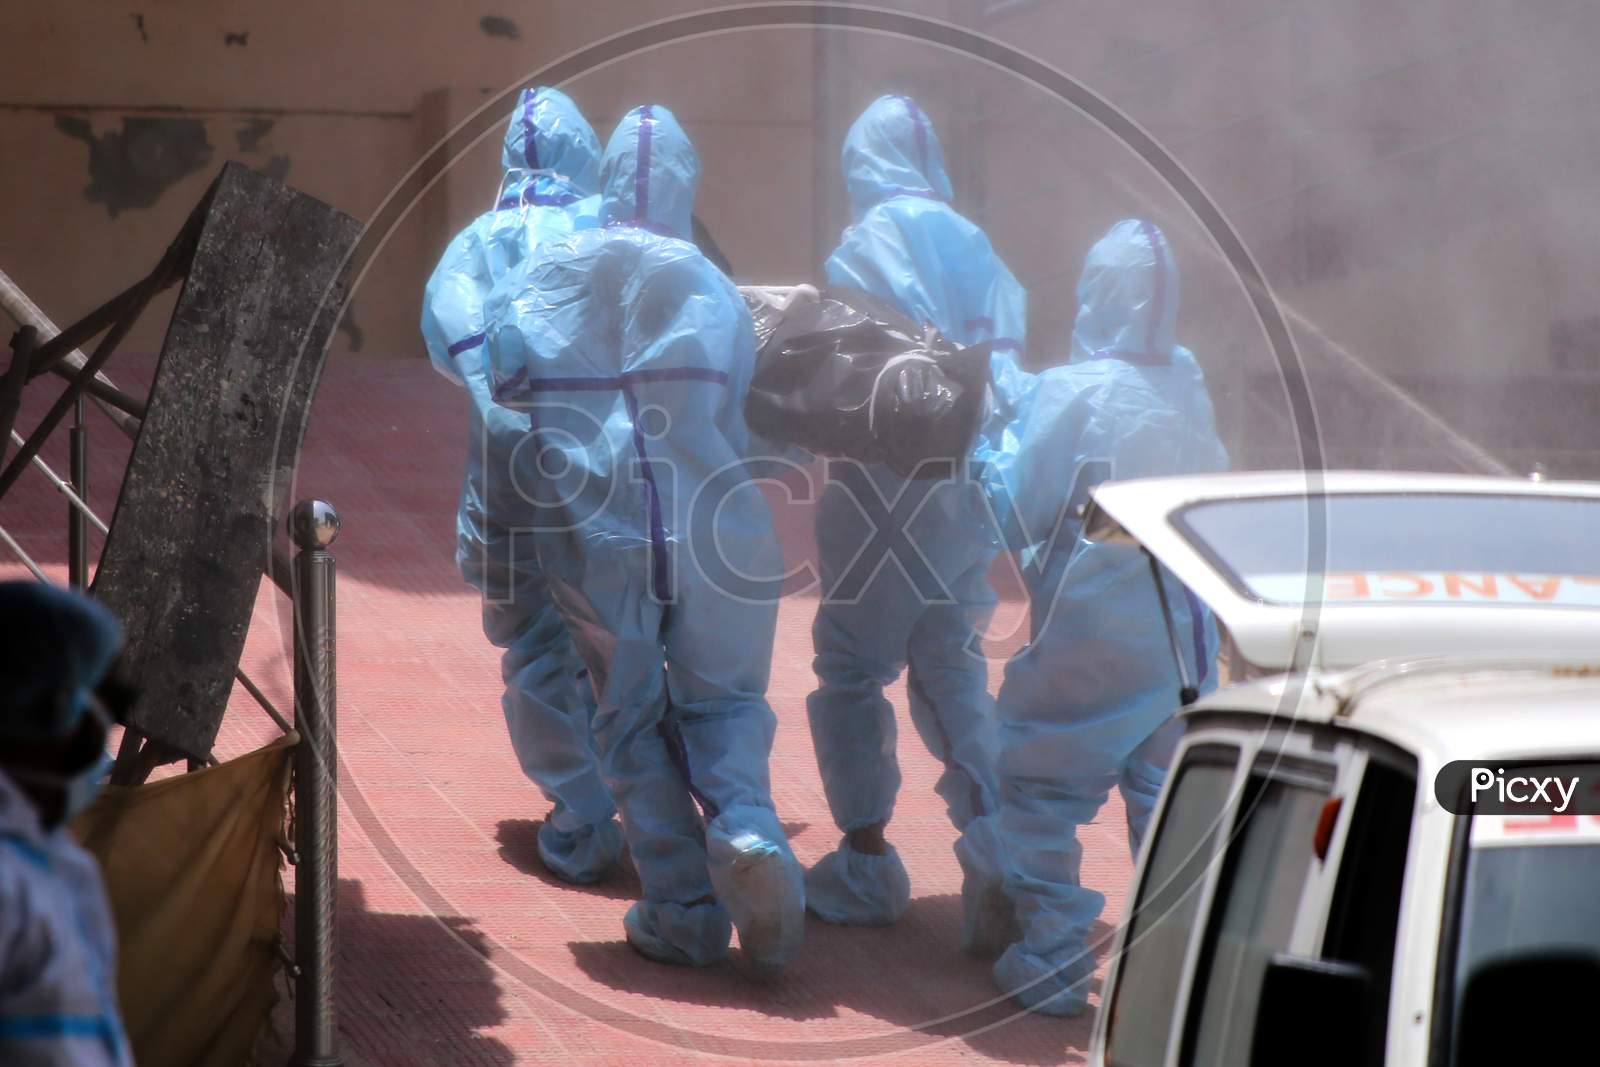 Health workers in hazmat suits carry the dead body of a person who died due to the coronavirus infection at a crematorium during the ongoing Covid-19 lockdown in Ajmer, Rajasthan on July 02, 2020.